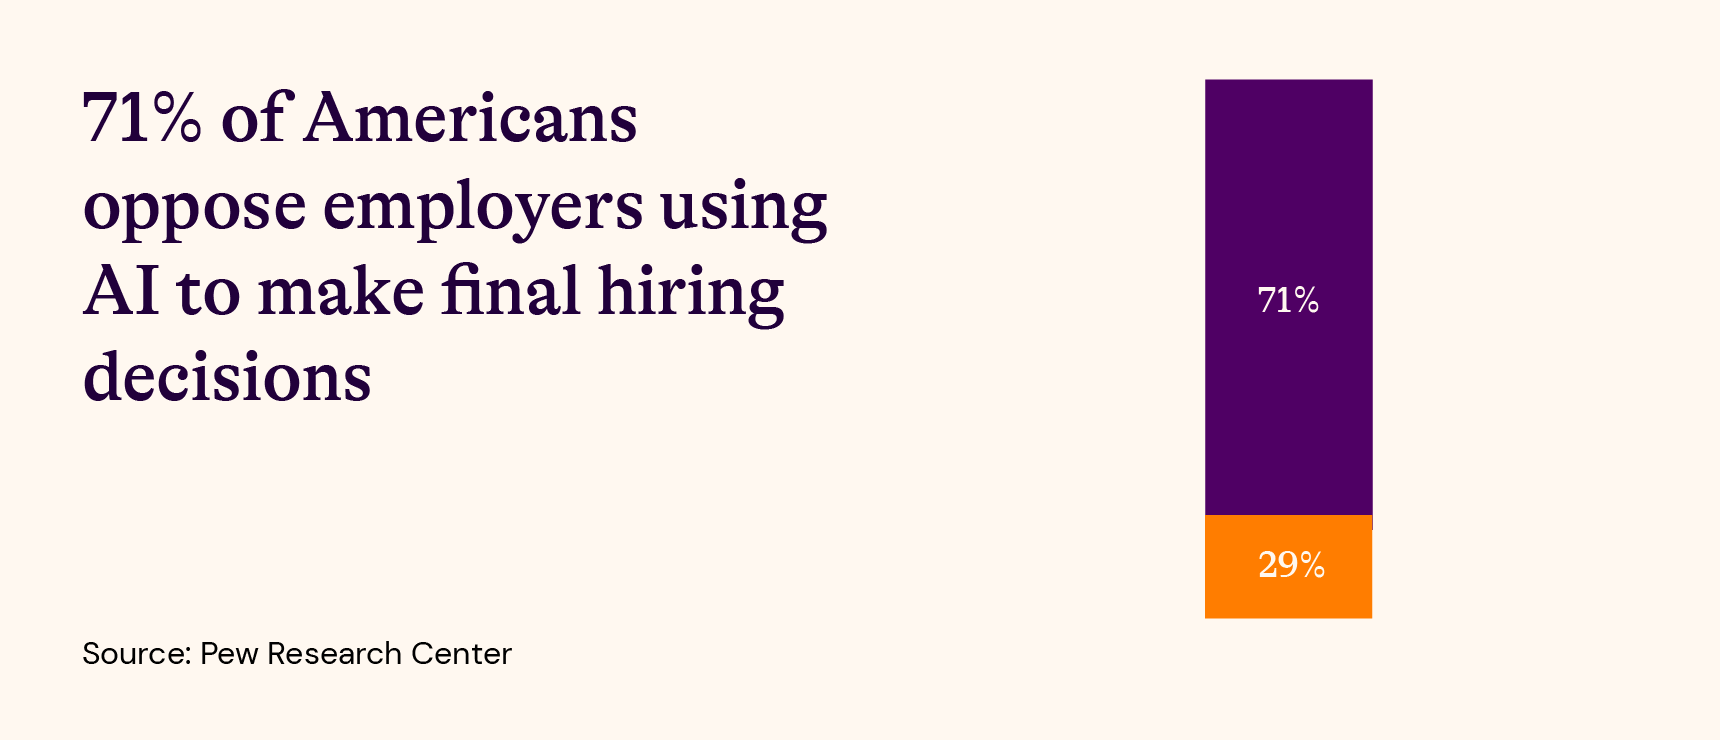 71% of Americans oppose employers using AI to making final hiring decisions  